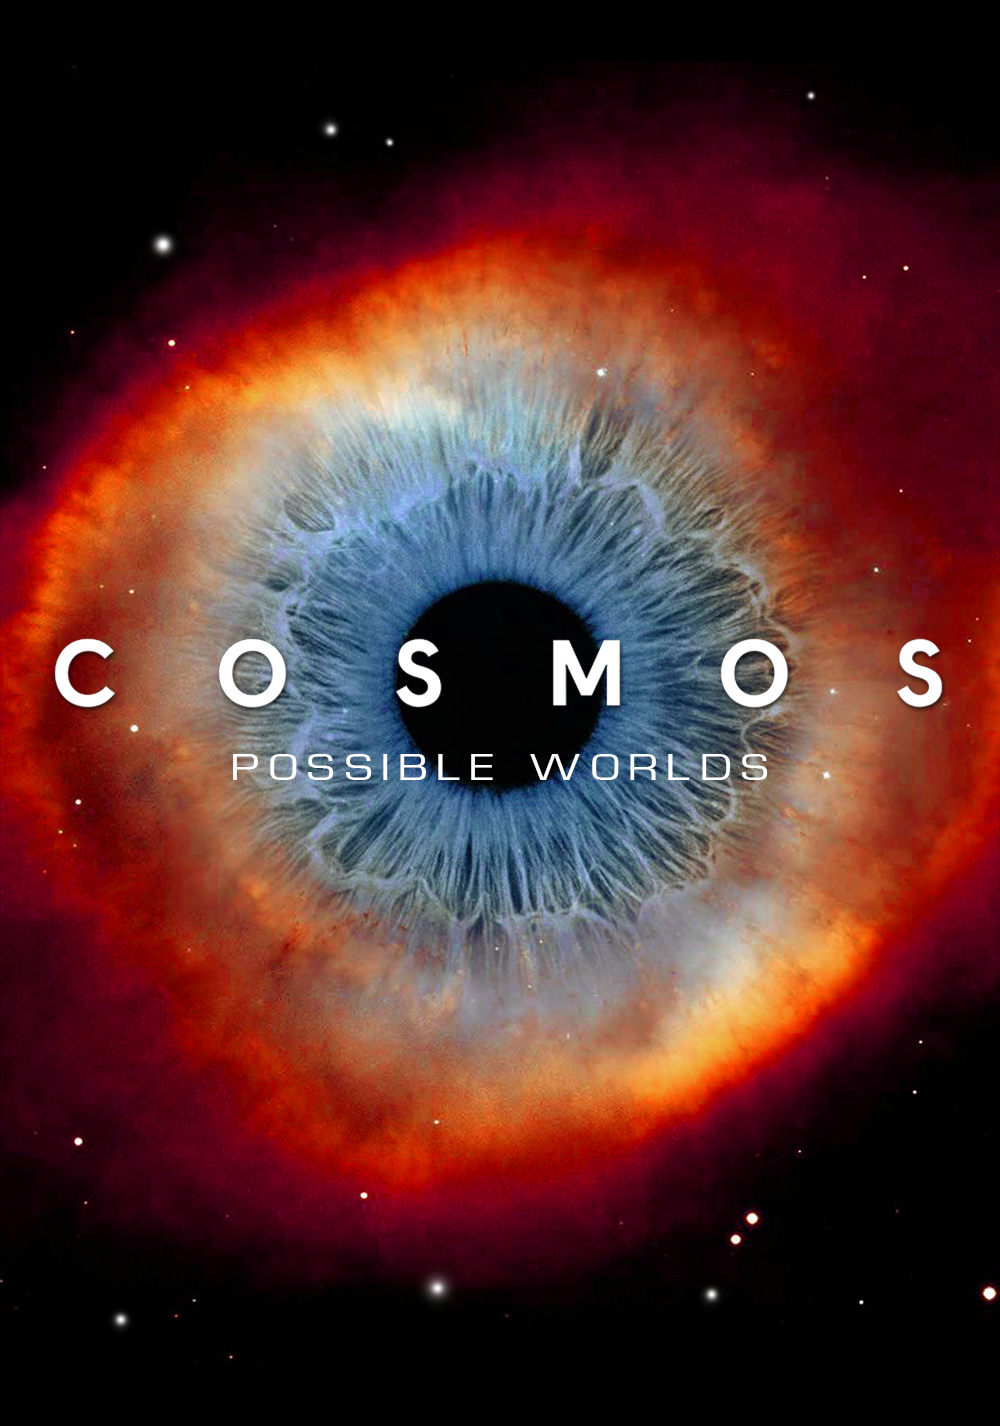  Cosmos: Possible Worlds کیهان جهان‌ های ممکن